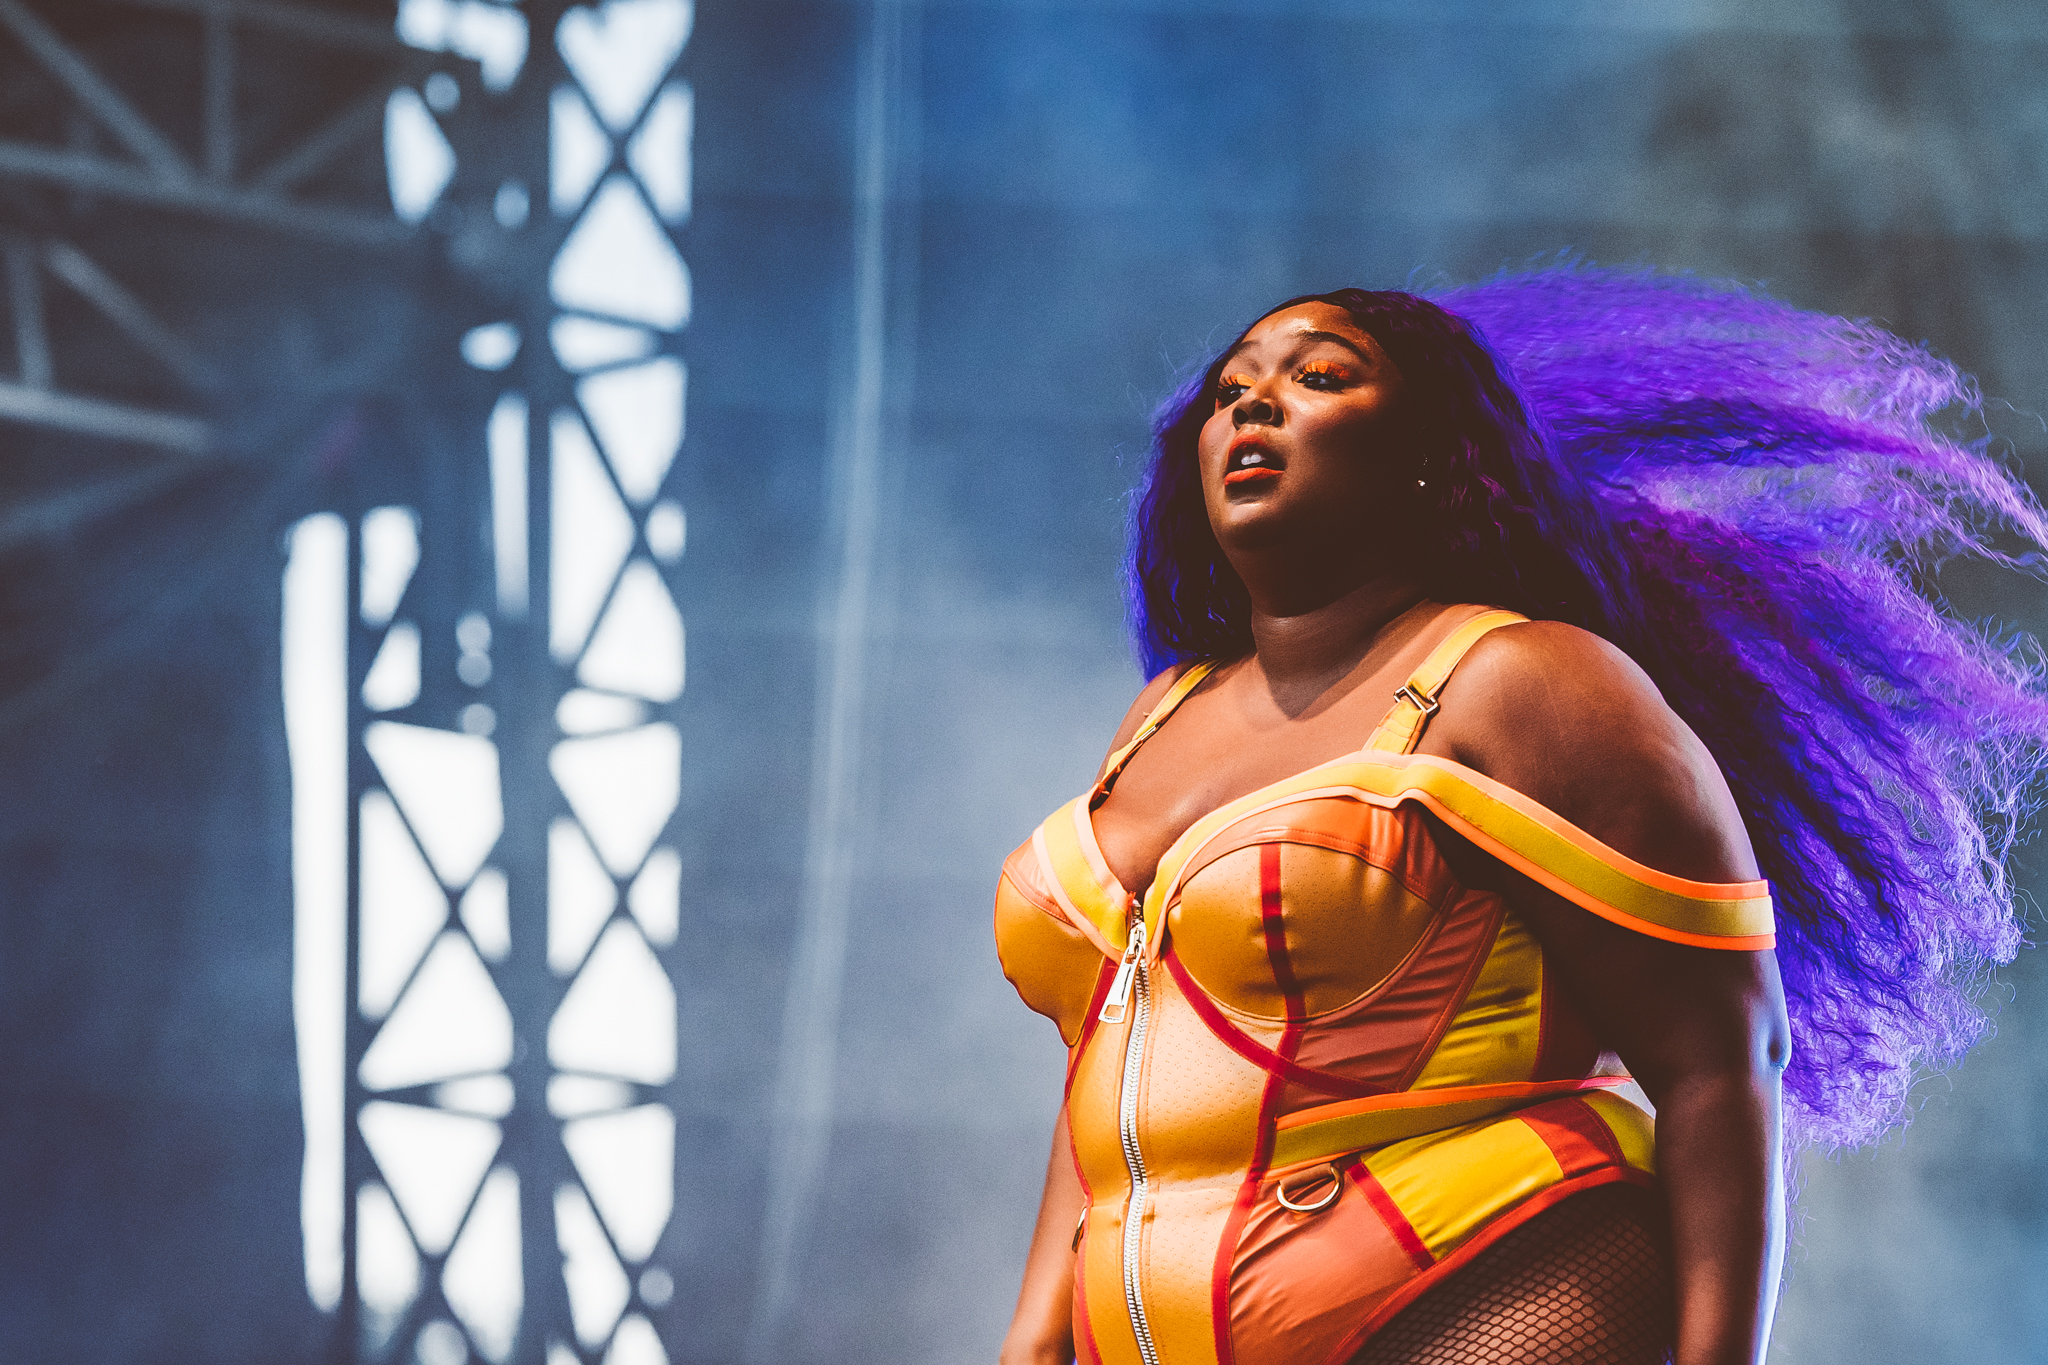 FLOOD - Lizzo Supported by Janelle Monáe and Houston Rockets in “Bootygate”